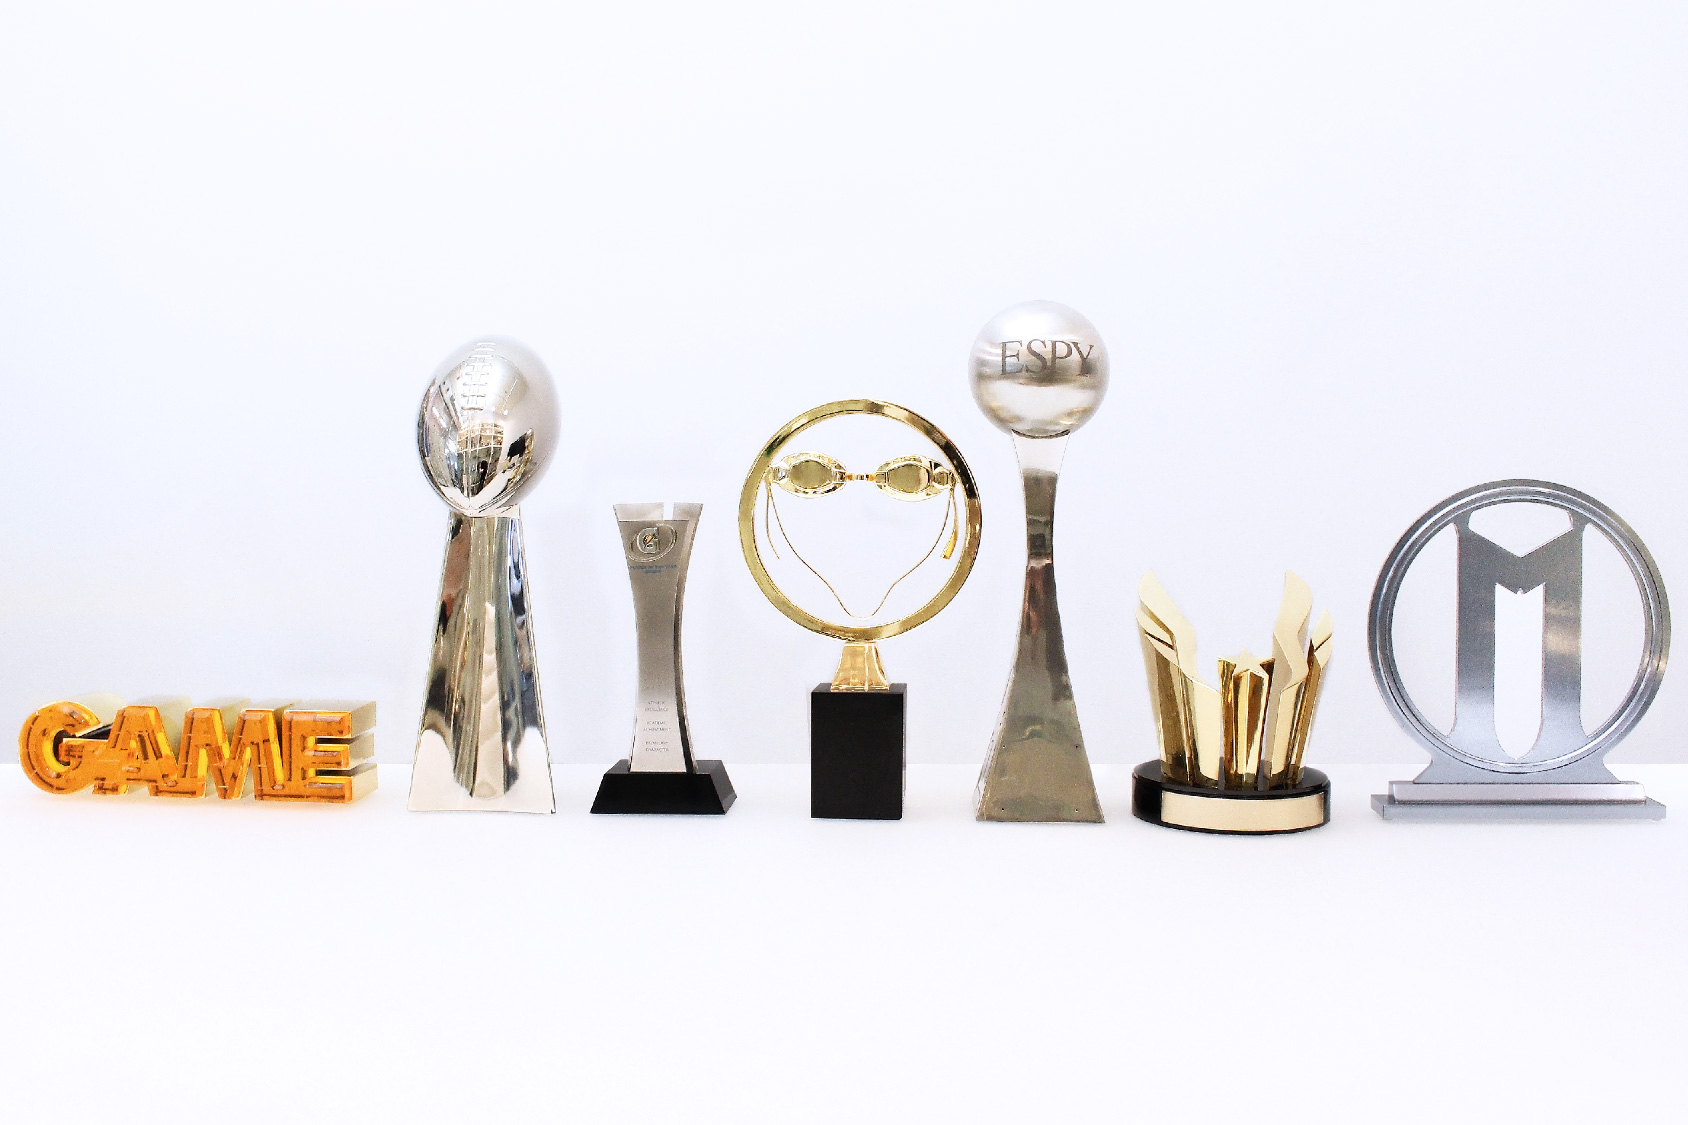 Six custom sports trophies by Society Awards grouped in a line on a white table